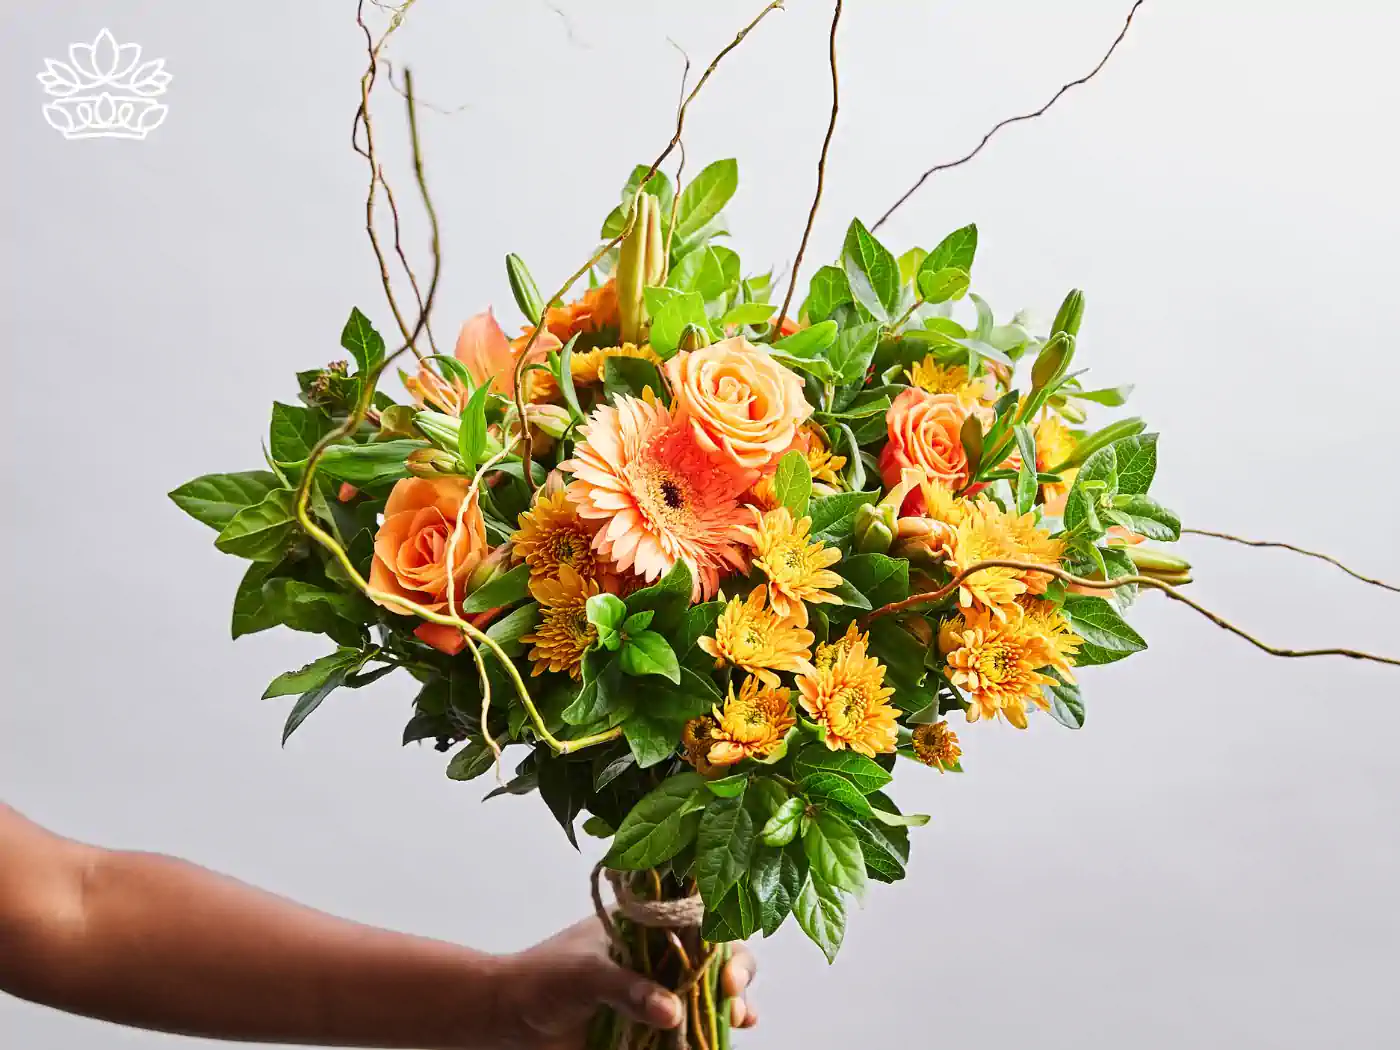 Hand holding a cheerful get well bouquet of orange roses and yellow daisies, interlaced with vibrant green leaves and delicate twigs, conveying warmth and well-wishes. Delivered with Heart. Fabulous Flowers and Gifts.